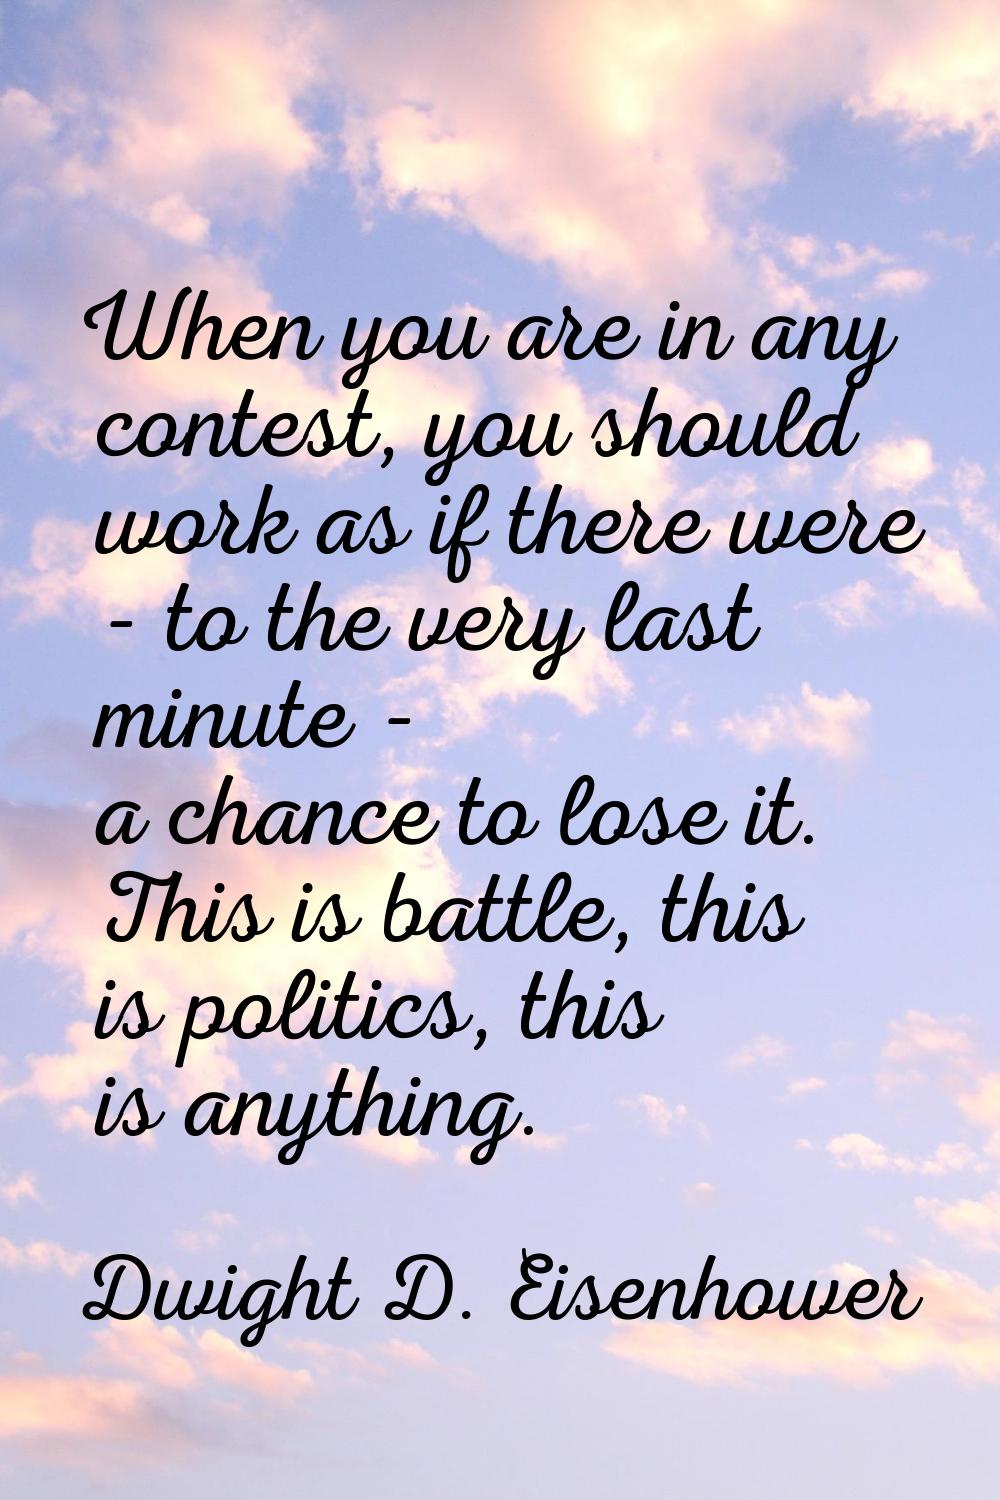 When you are in any contest, you should work as if there were - to the very last minute - a chance 